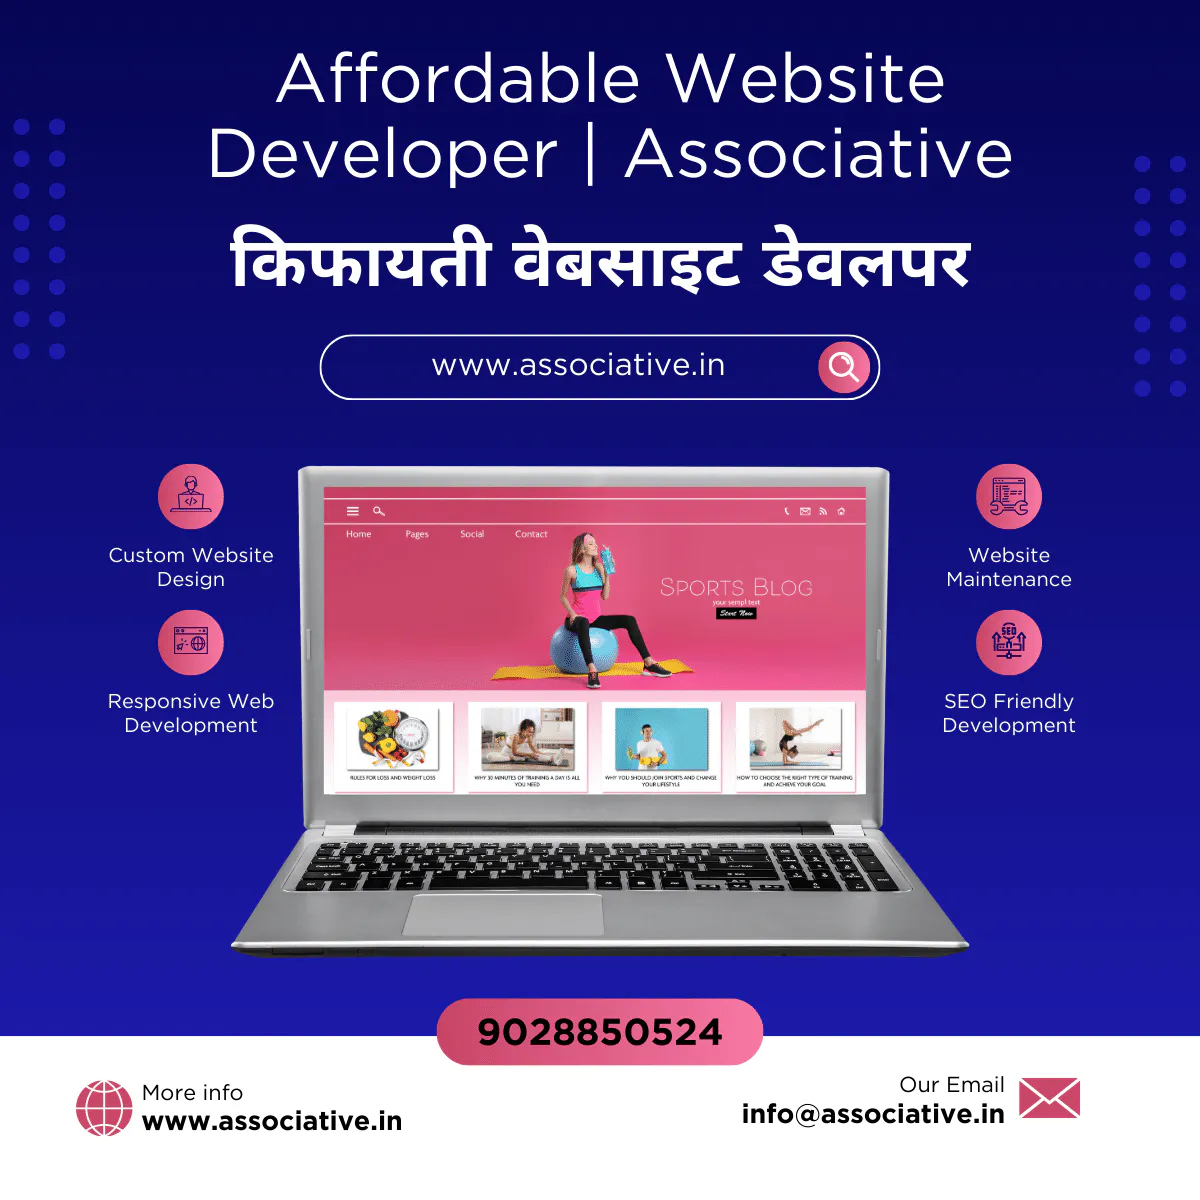 Affordable Web Design for Small Businesses in Pune, India